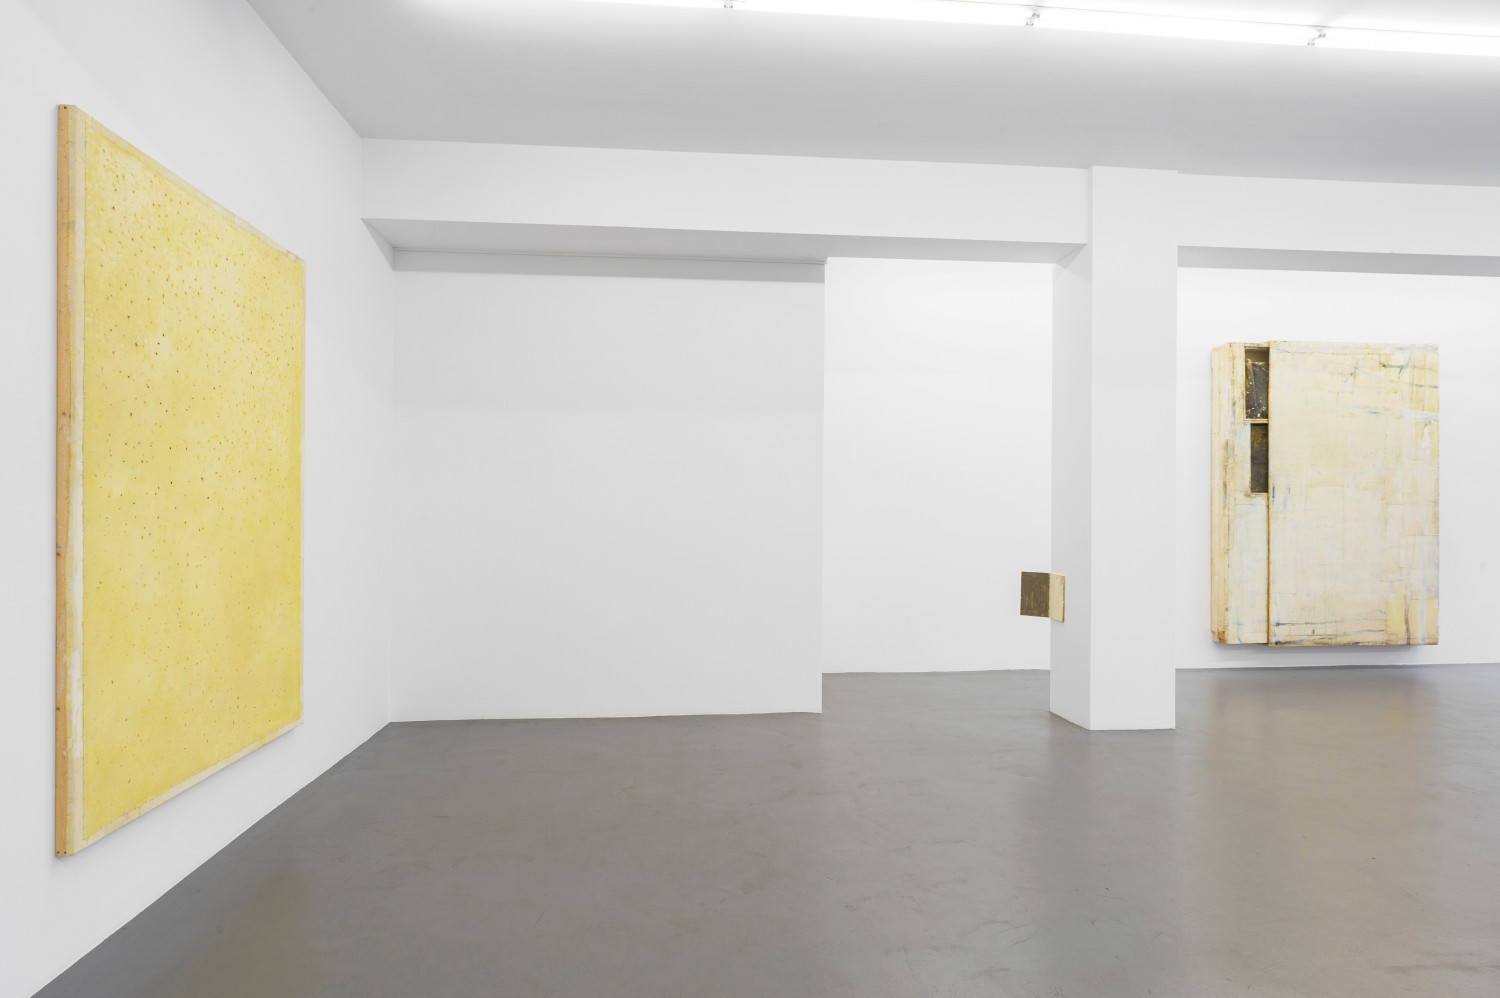 Lawrence Carroll, ‘A Tribute to Lawrence Carroll’, Installation view, Buchmann Galerie, 2019